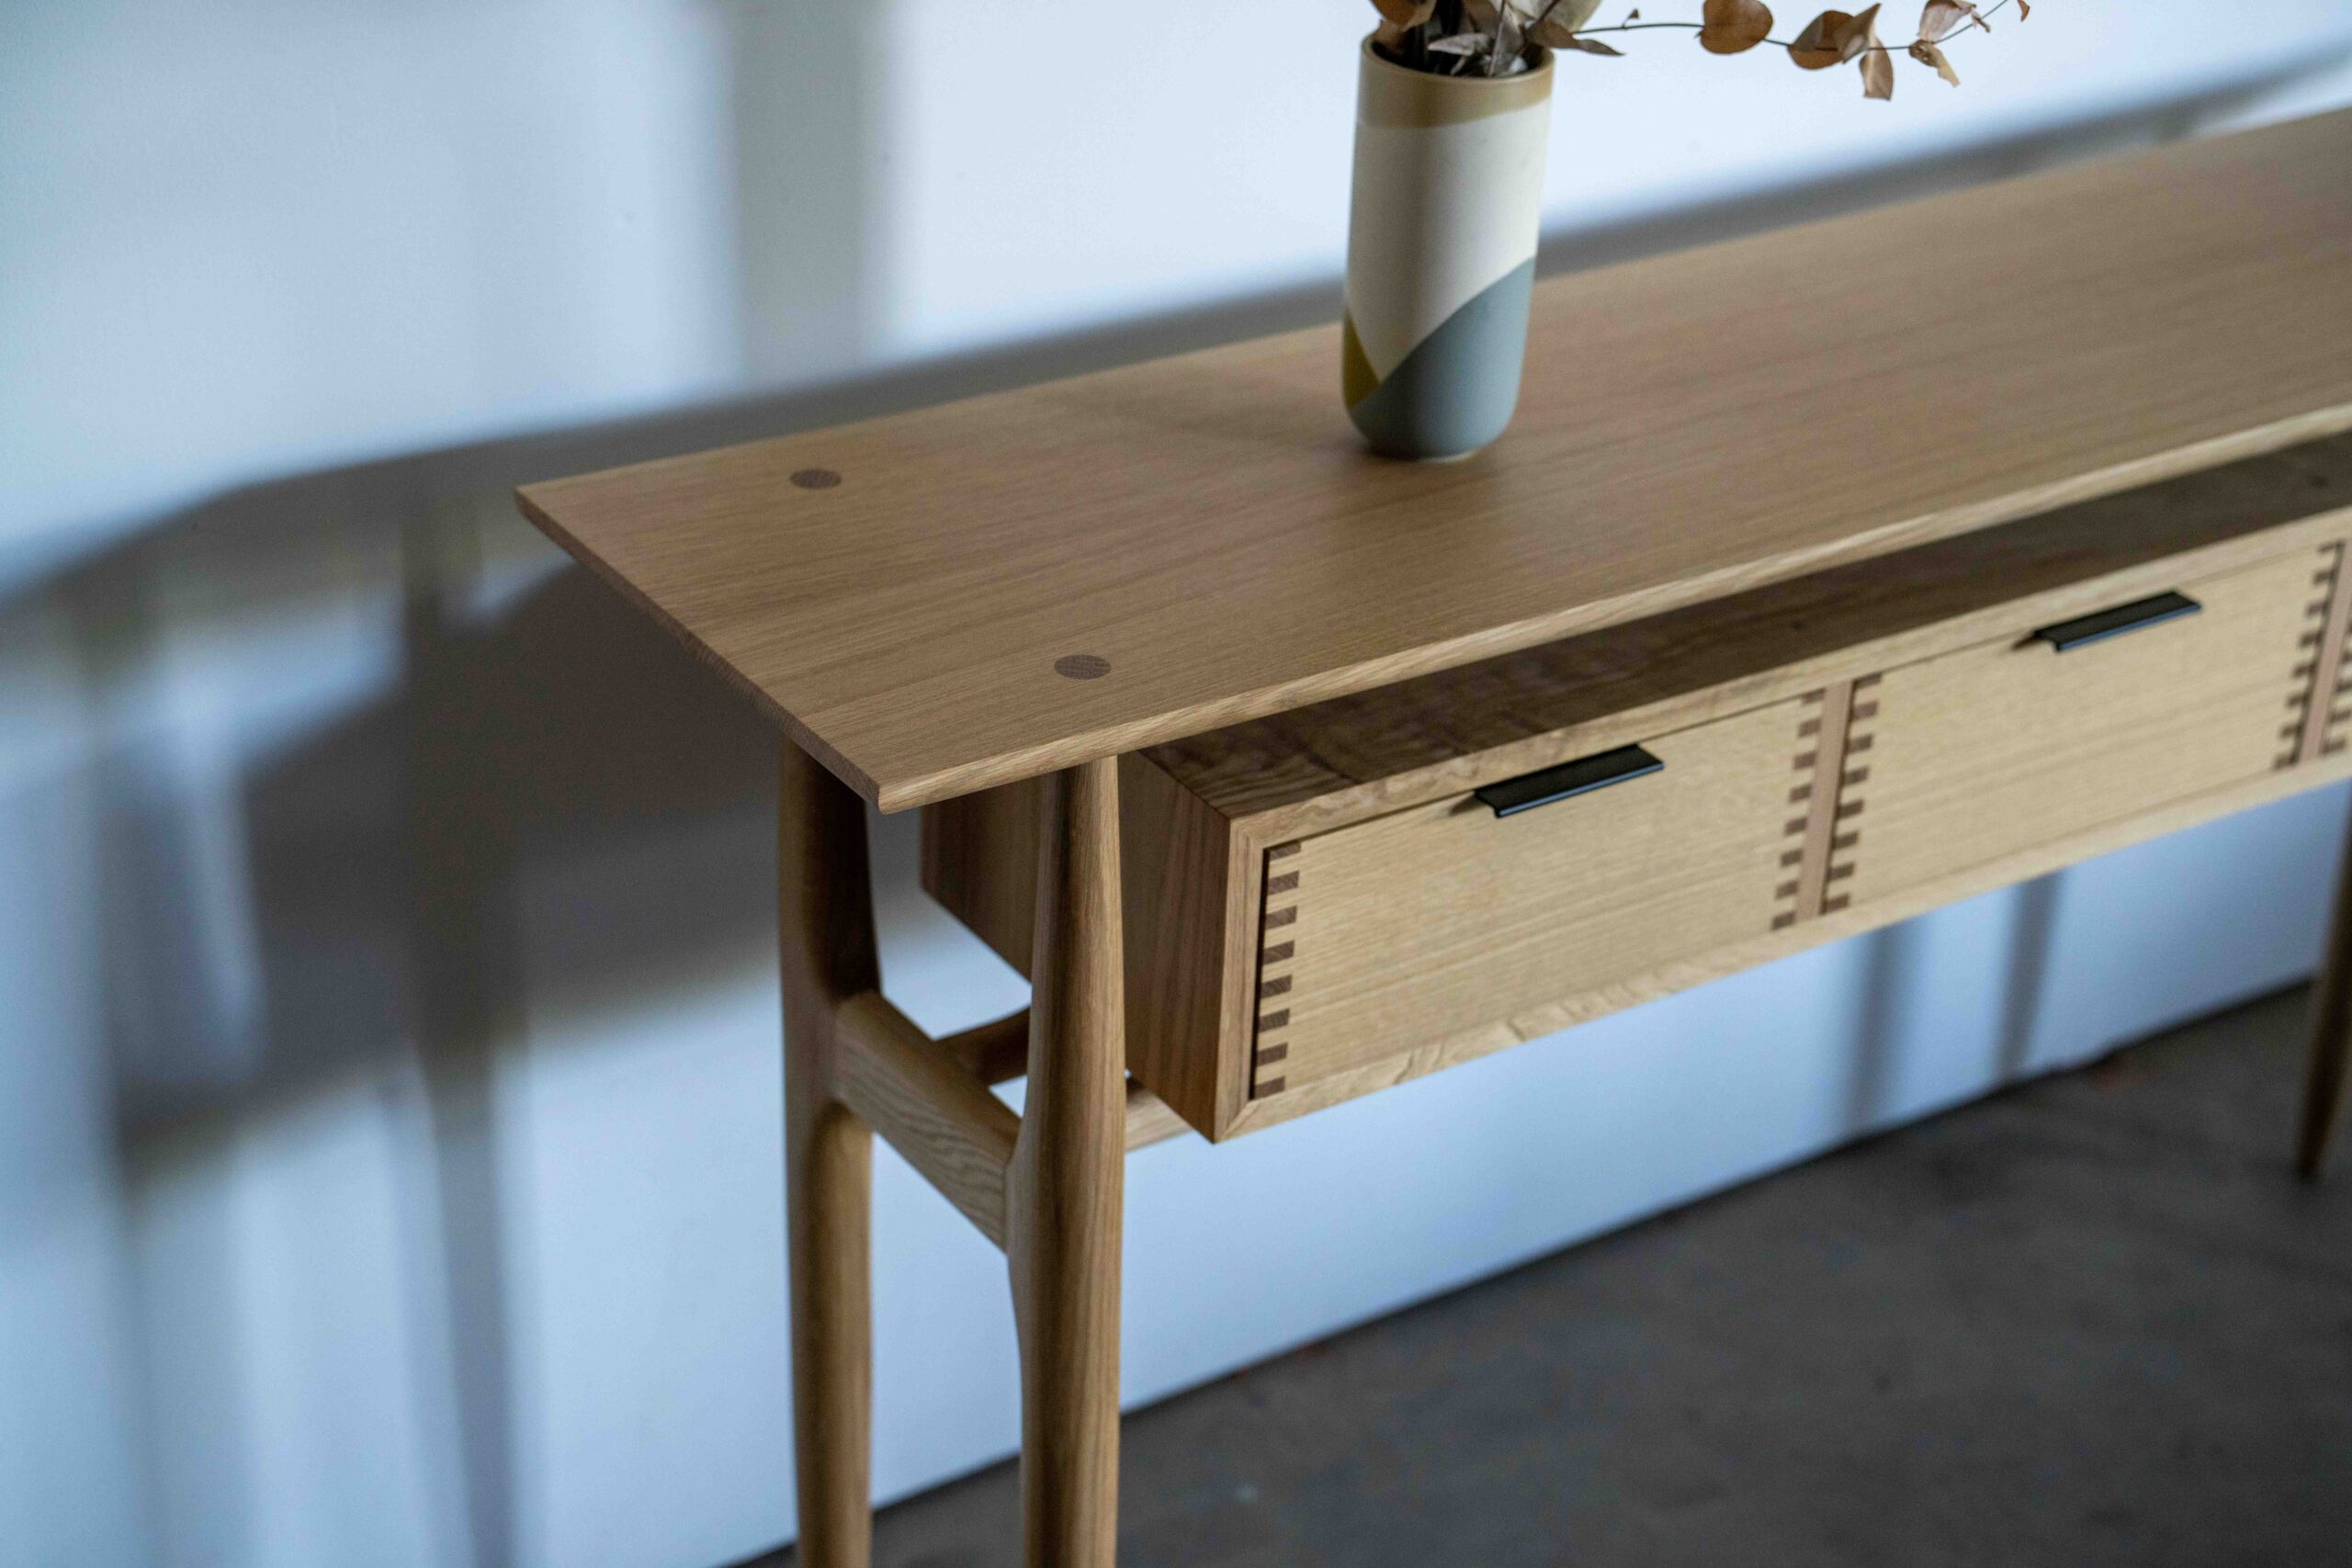 A midcentury modern entry table in white oak with black drawer pulls